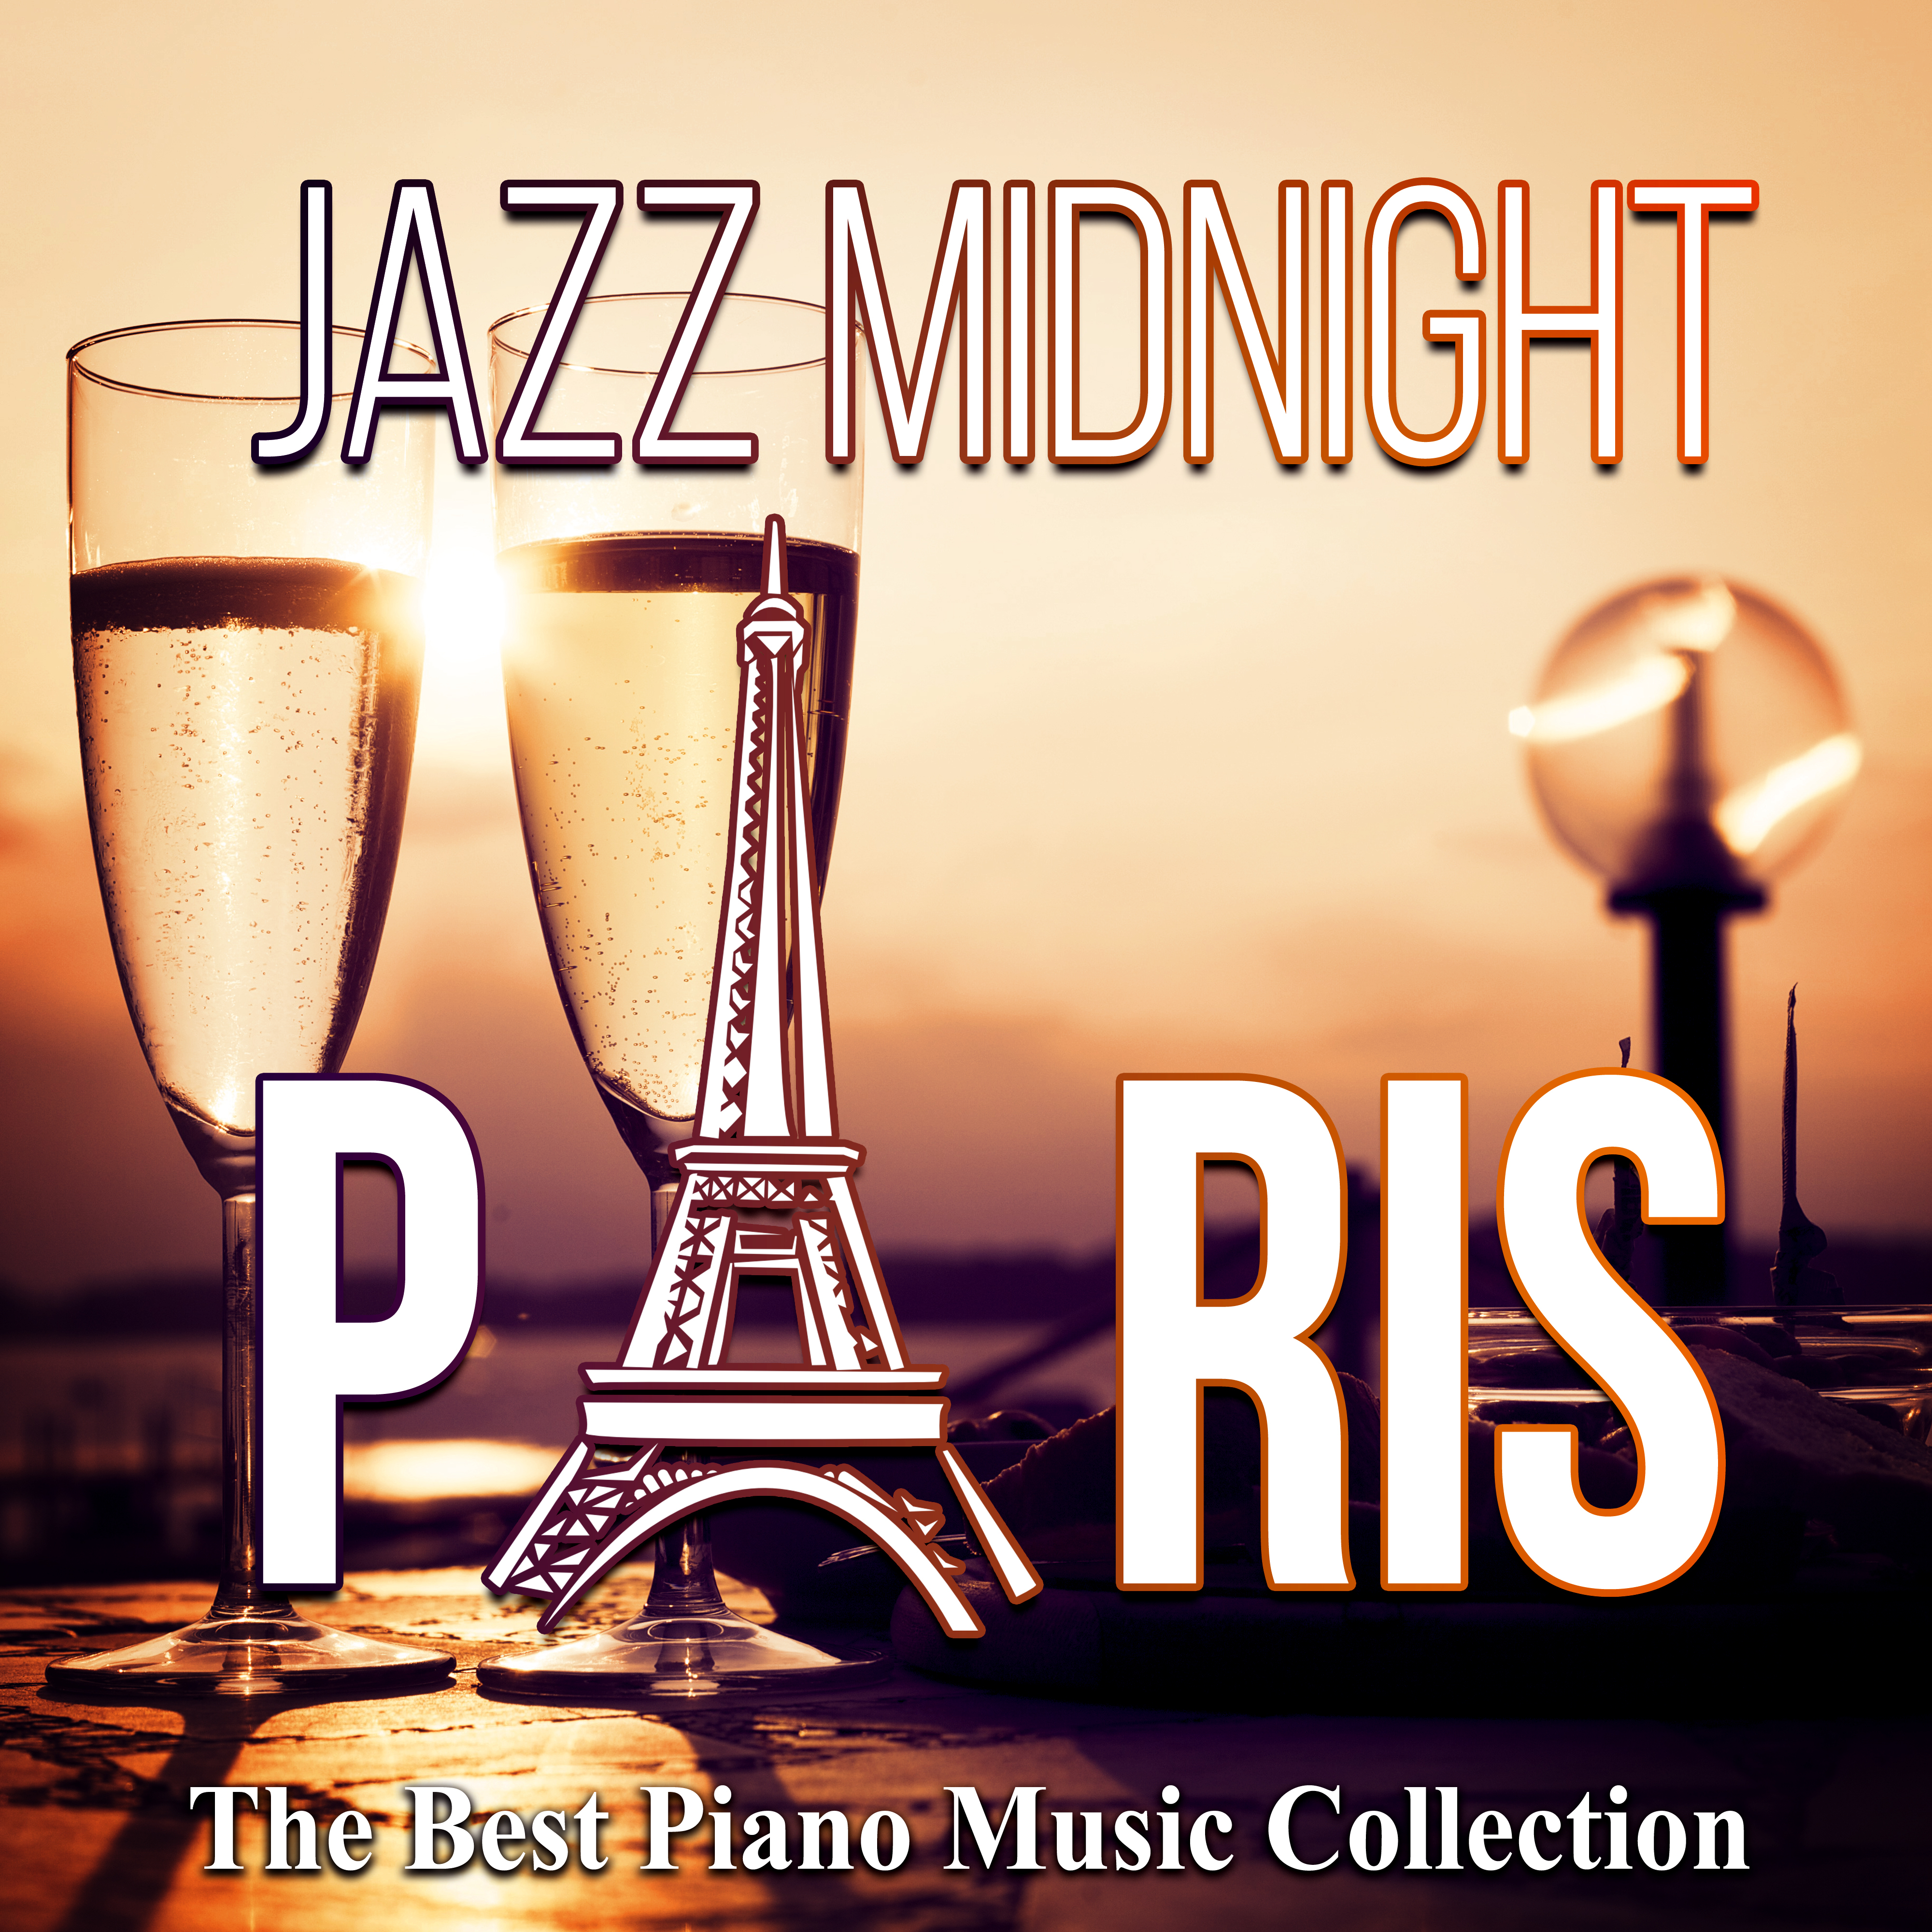 Jazz Midnight Paris: The Best Piano Music Collection, Smooth Jazz Relaxation, Midnight in Paris Romantic Date Night, 50 Shades of Love, Paris Eiffel Tower